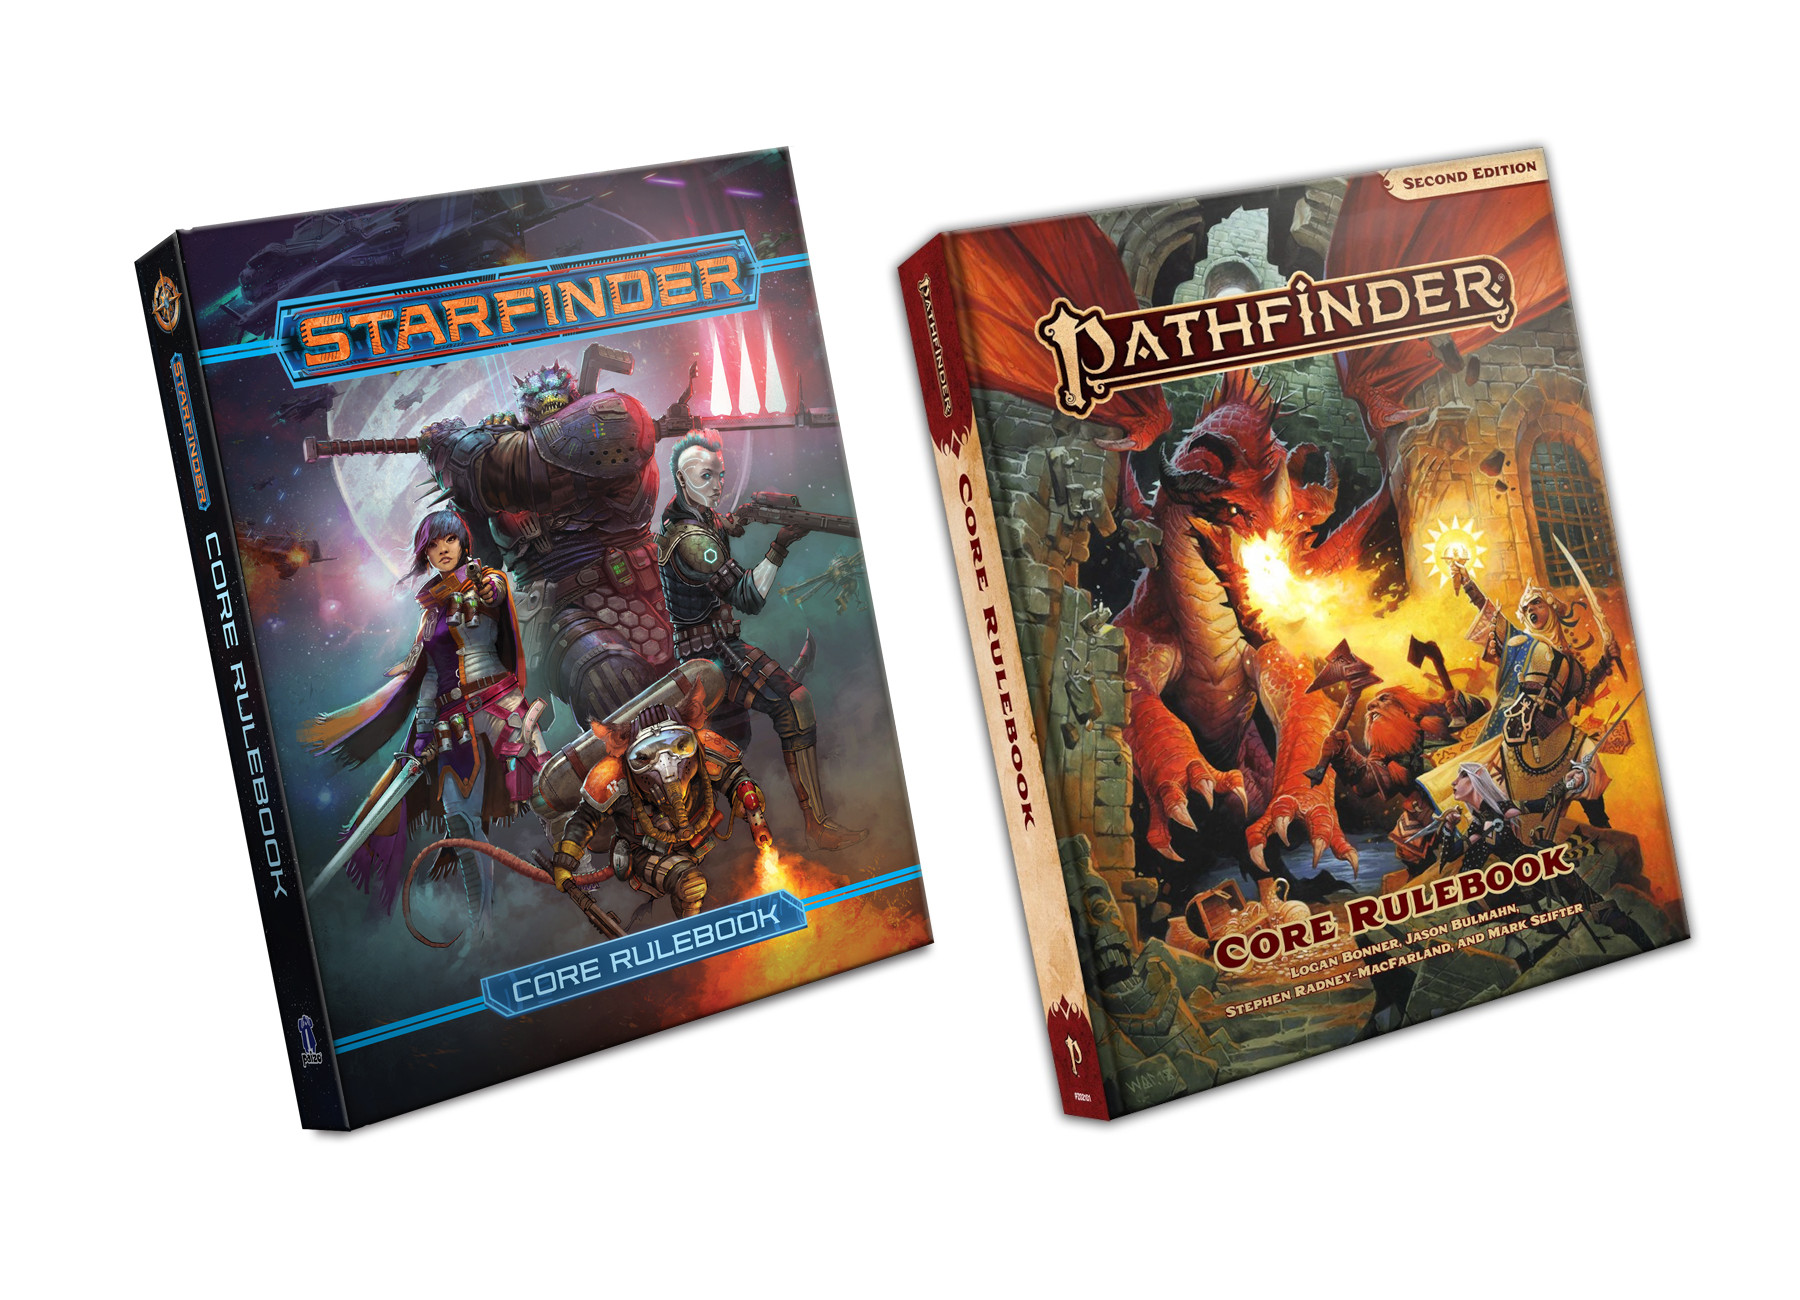 Pathfinder Second Edition Core Rulebook and Starfinder Core Rulebook Digital CD Key 12.58 $